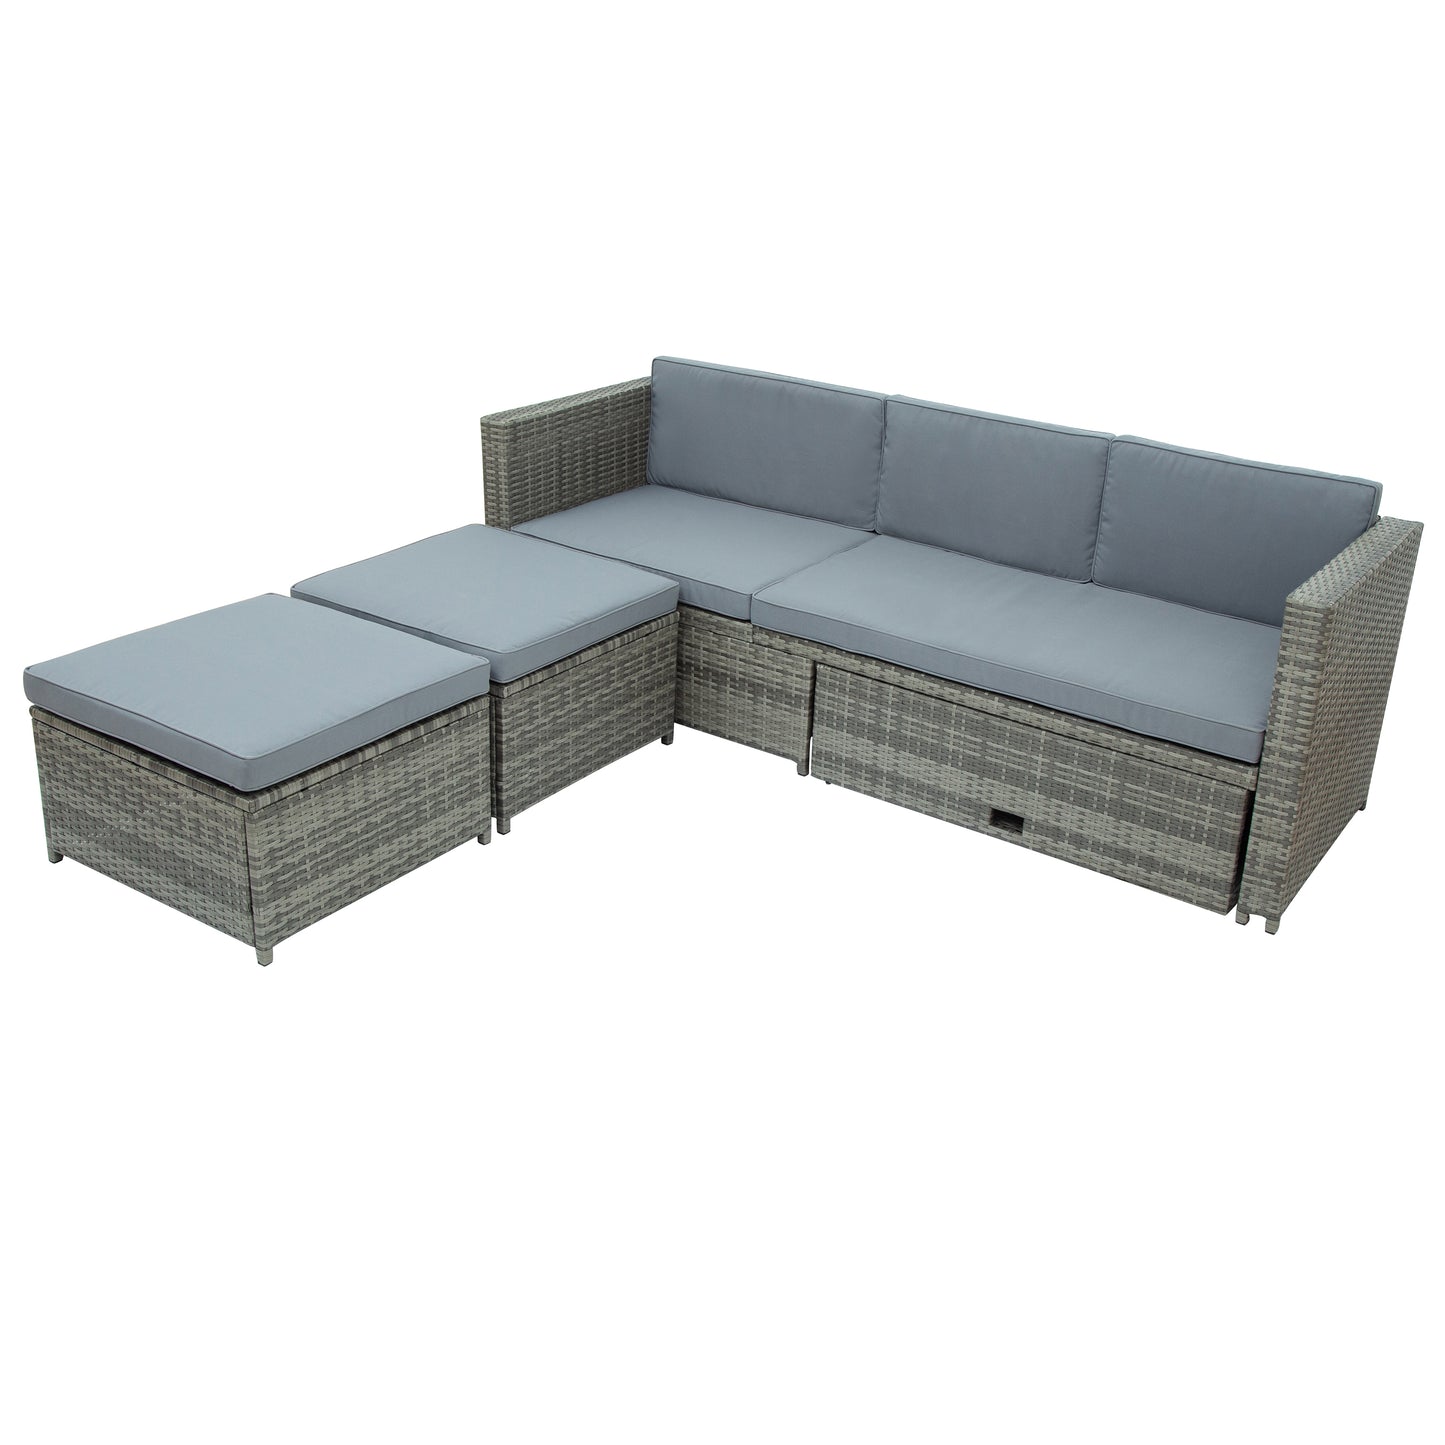 SYNGAR Gray 4 Piece Patio Wicker Furniture Set, UV Proof Rattan Outdoor Sectional Sofa Set with Retractable Table, Space Saving Conversation Bistro Set for Garden Balcony Backyard Poolside